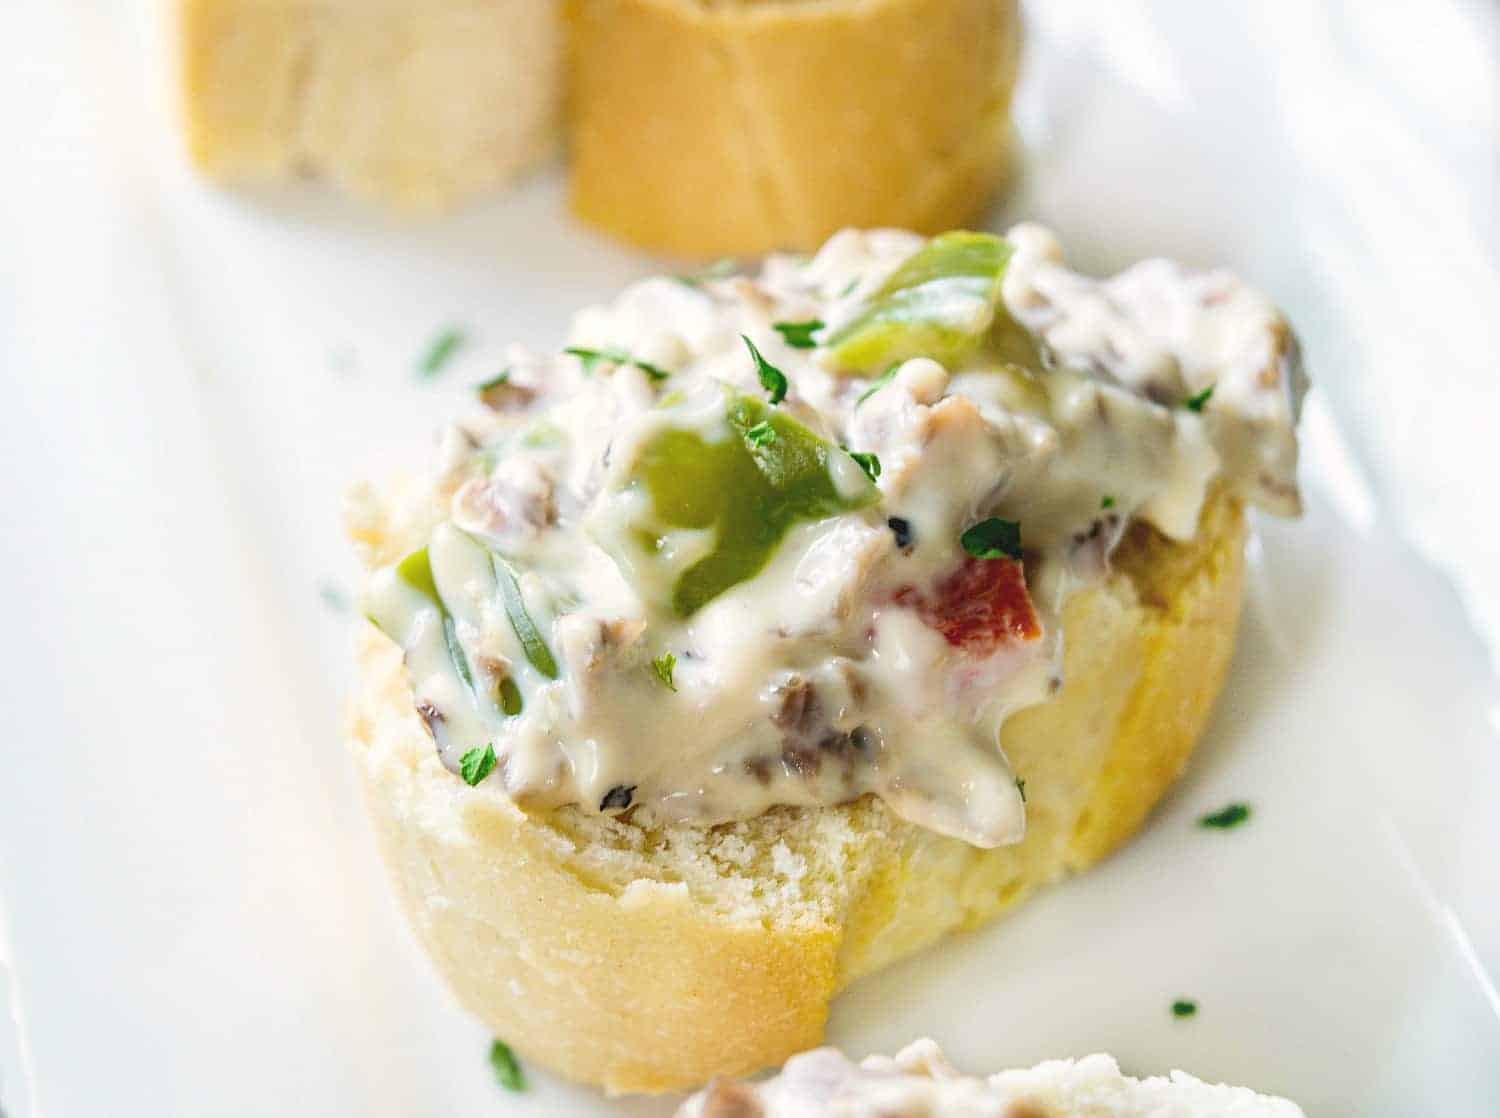 Philly Steak And Cheese Crostini Appetizer recipe on plate. 